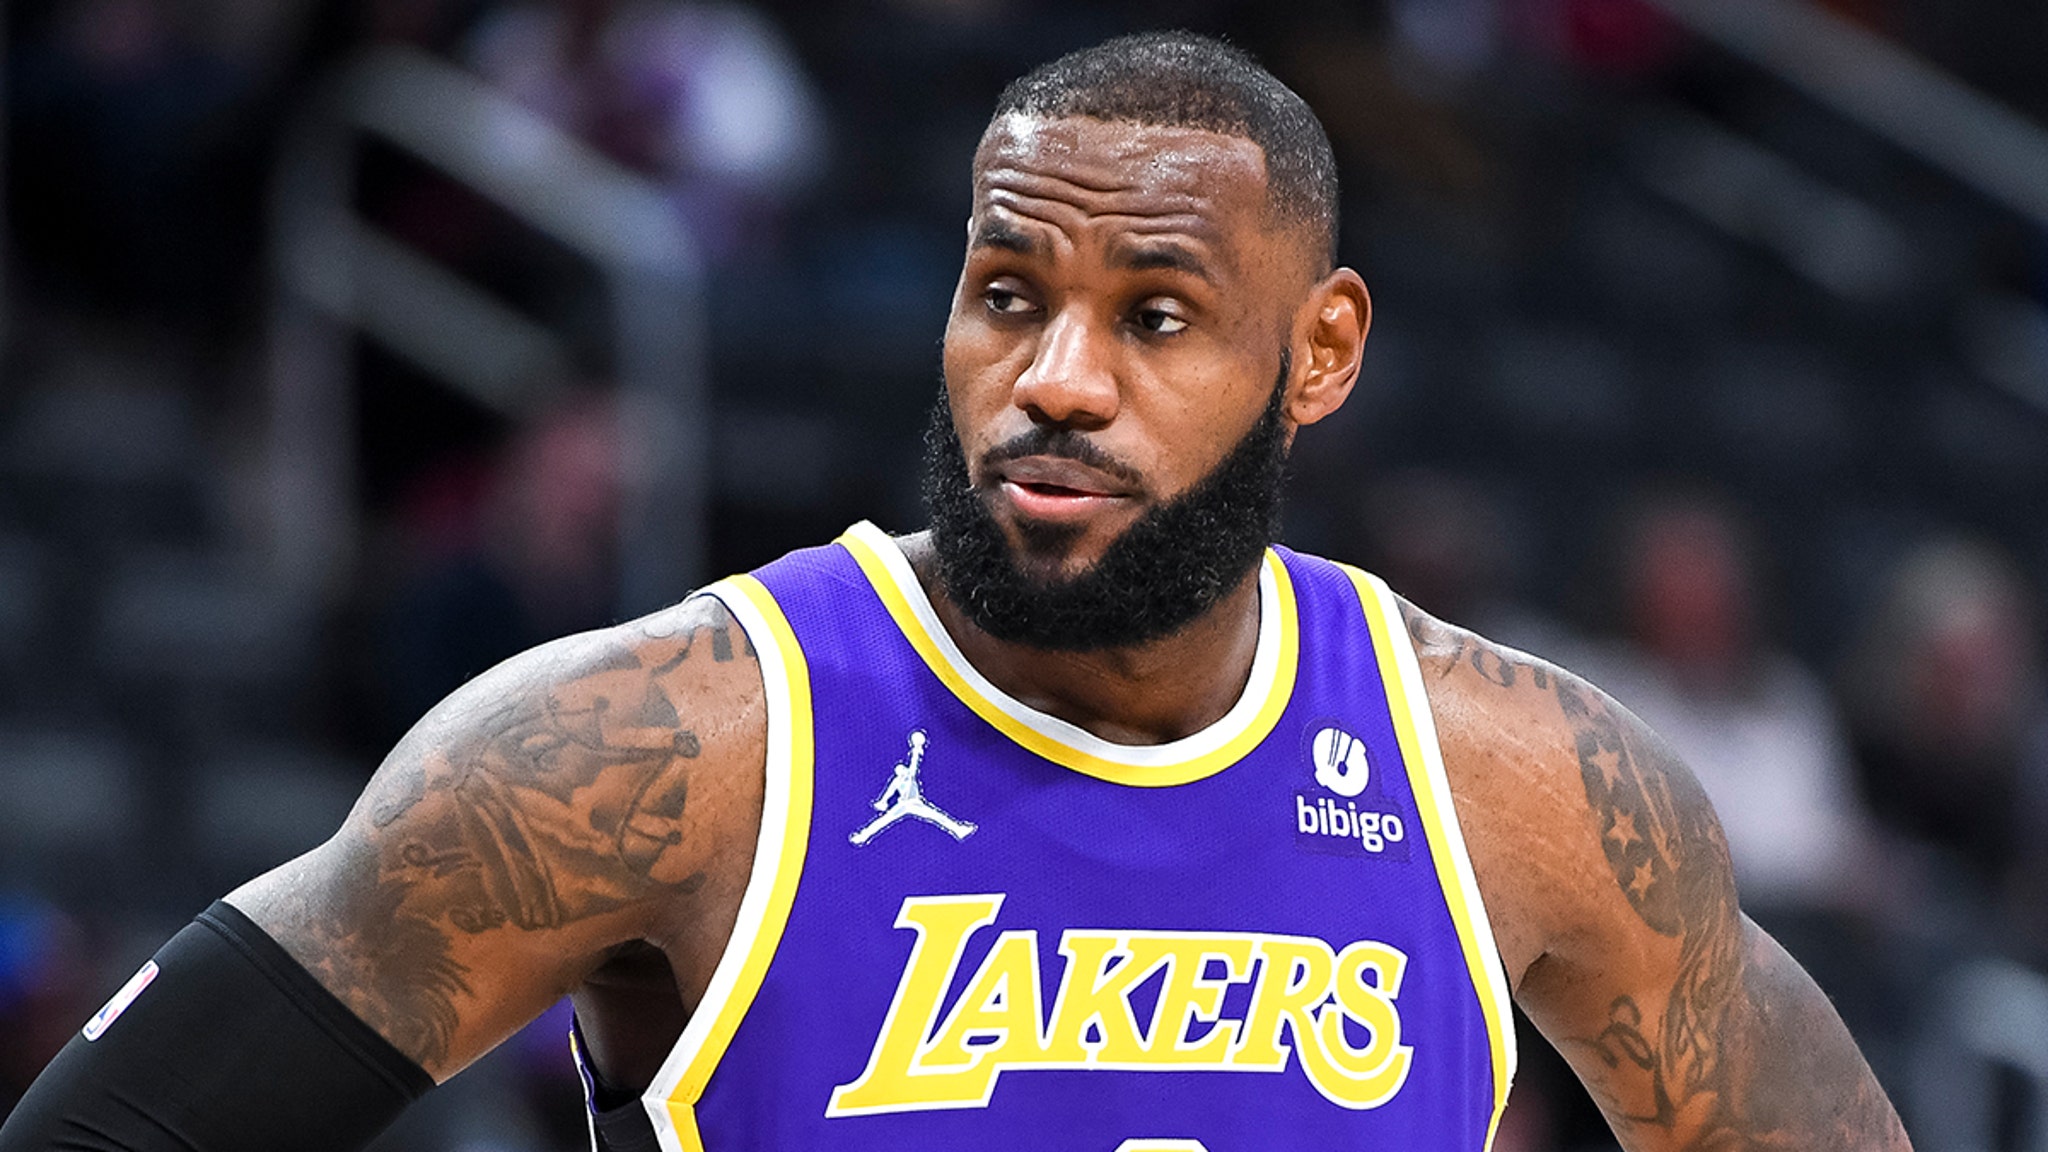 LeBron James Enters NBA's Health and Safety Protocols, Will Miss Kings Game thumbnail